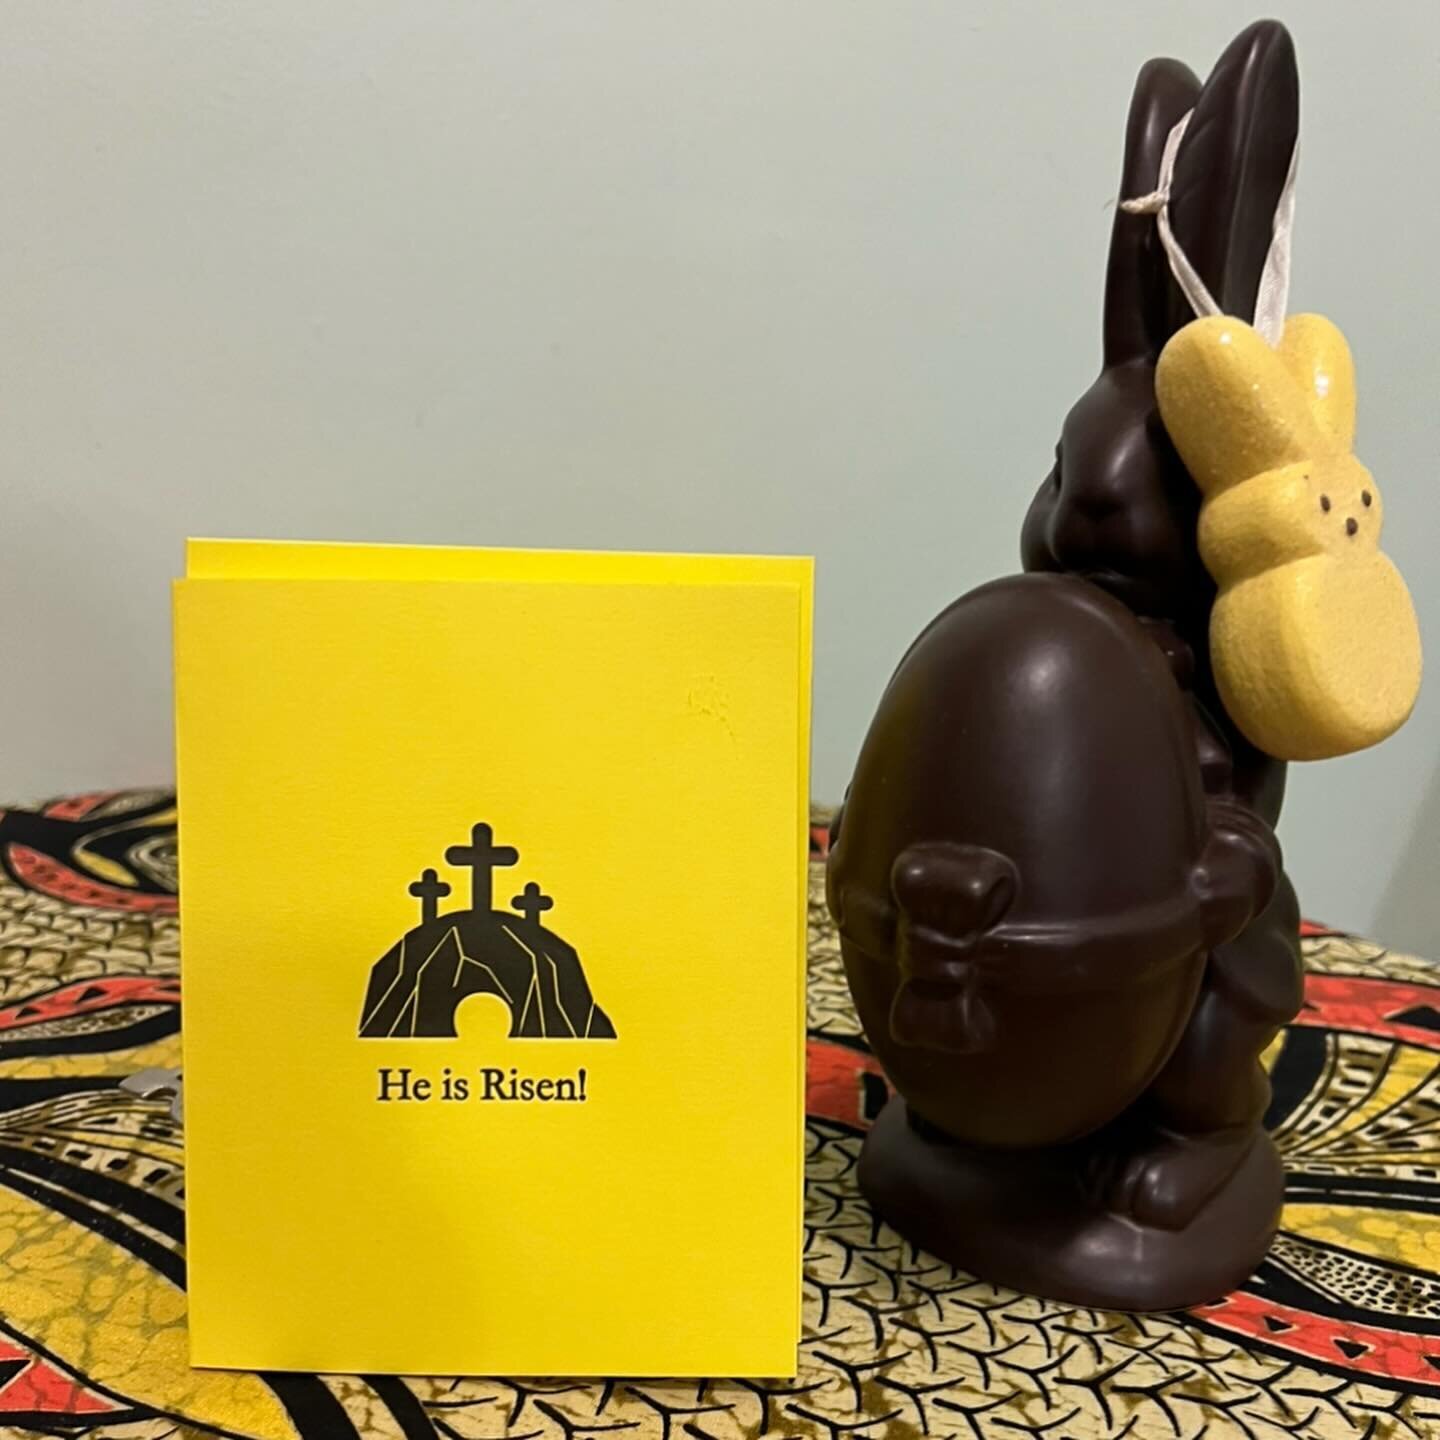 Easter is coming! See link in bio for more information about our bright &ldquo;Peep&rdquo; yellow greeting card. #easter #eastergreetingcard